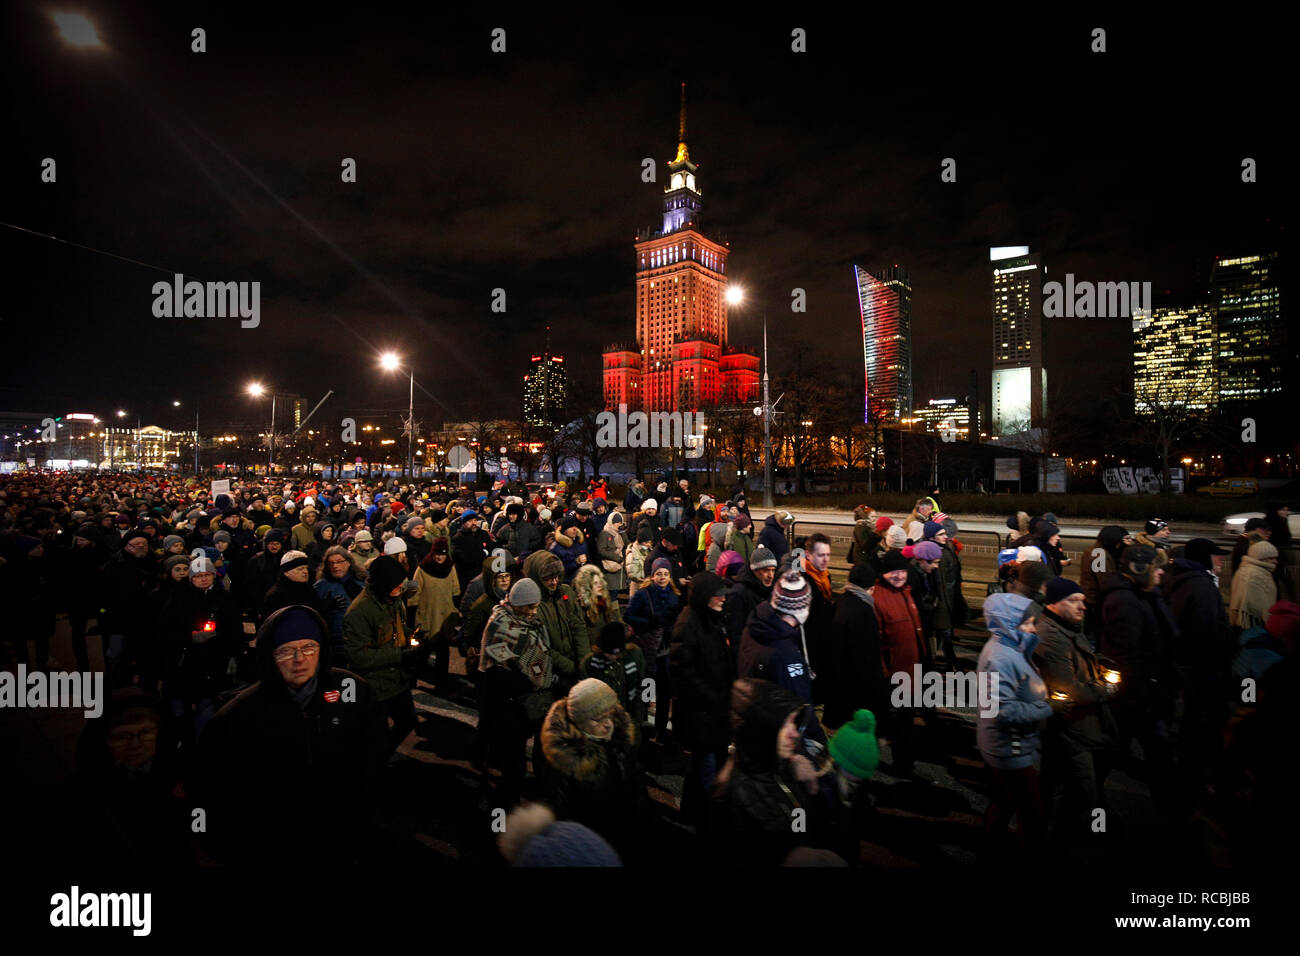 (190115) -- WARSAW, Jan. 15, 2019 (Xinhua) -- People march in commemoration of Pawel Adamowicz, the late Mayor of the Polish port city of Gdansk, in center of Warsaw, Poland, Jan. 14, 2018.     The UN refugee agency, UNHCR, said Monday it is "deeply shocked and saddened" to hear that Pawel Adamowicz has died after being stabbed at a charity event.     Adamowicz launched the Gdansk "Immigrant Integration Model" in 2016, a model that has inspired other Polish cities, said the UN agency.     The agency wrote in February 2018 that the Gdansk Model is a comprehensive program to help refugees and mi Stock Photo